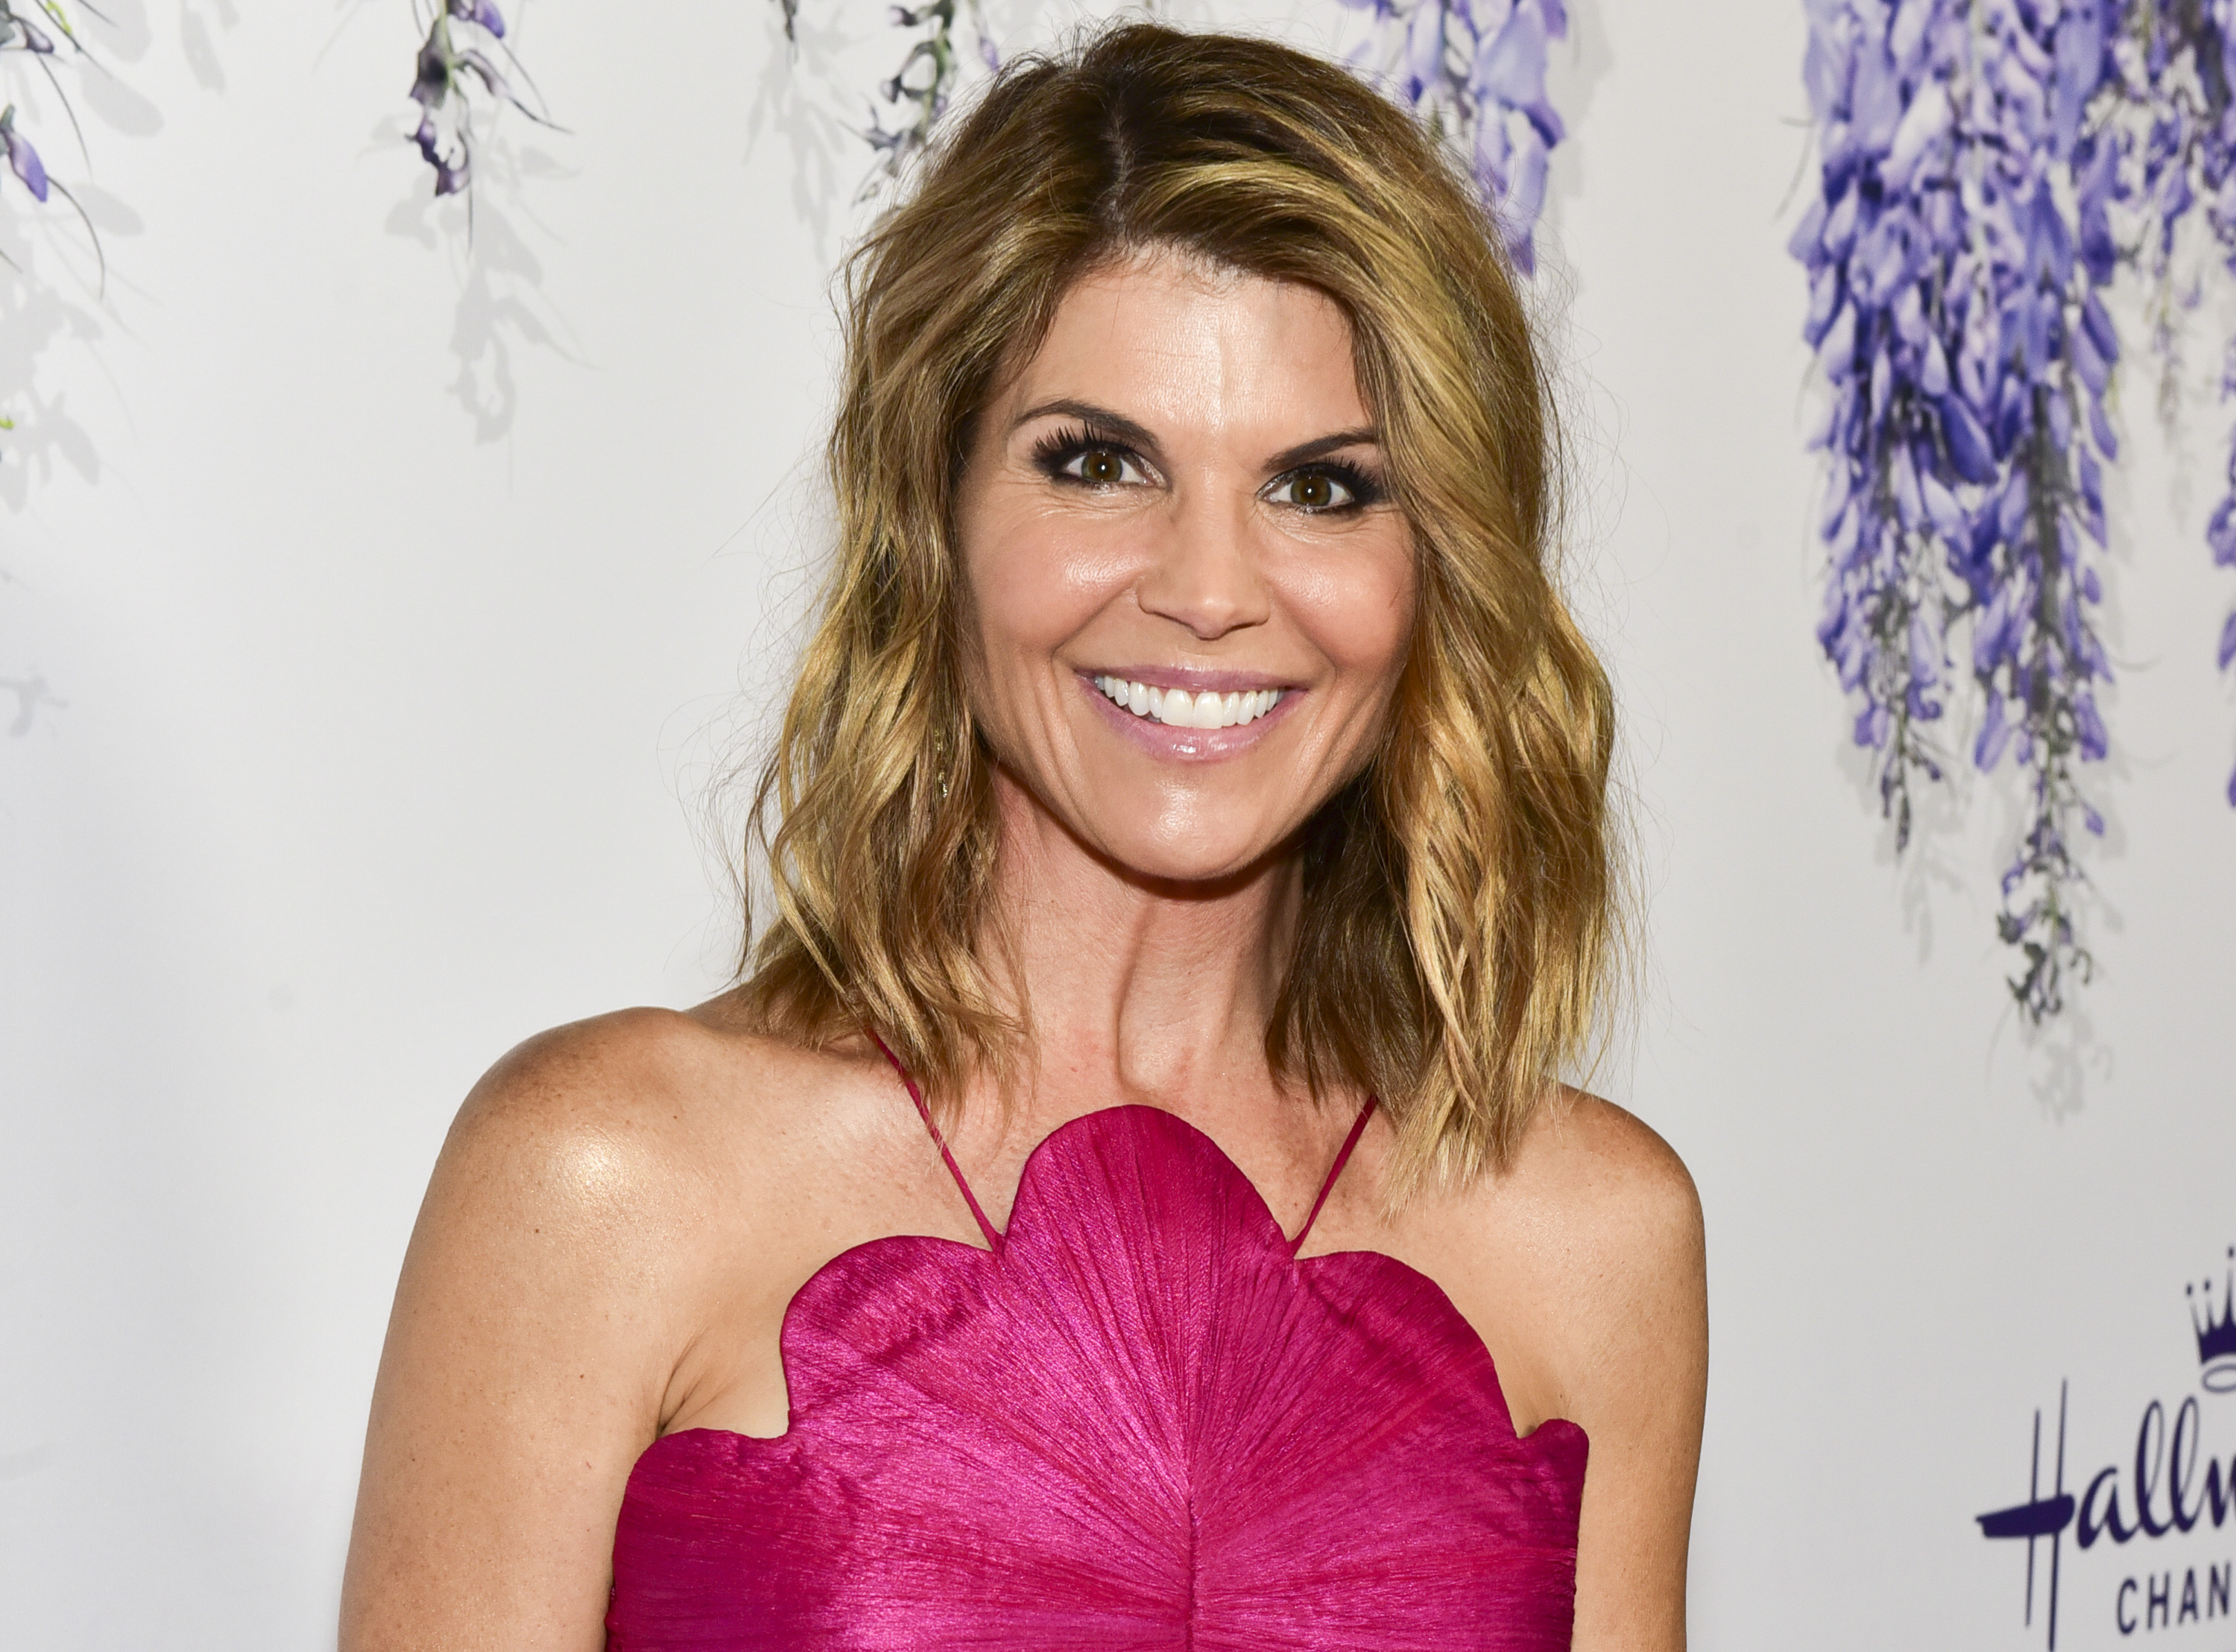 Lori Loughlin attends the 2018 Hallmark Channel Summer TCA on July 26, 2018 in Beverly Hills, California | Source: Getty Images